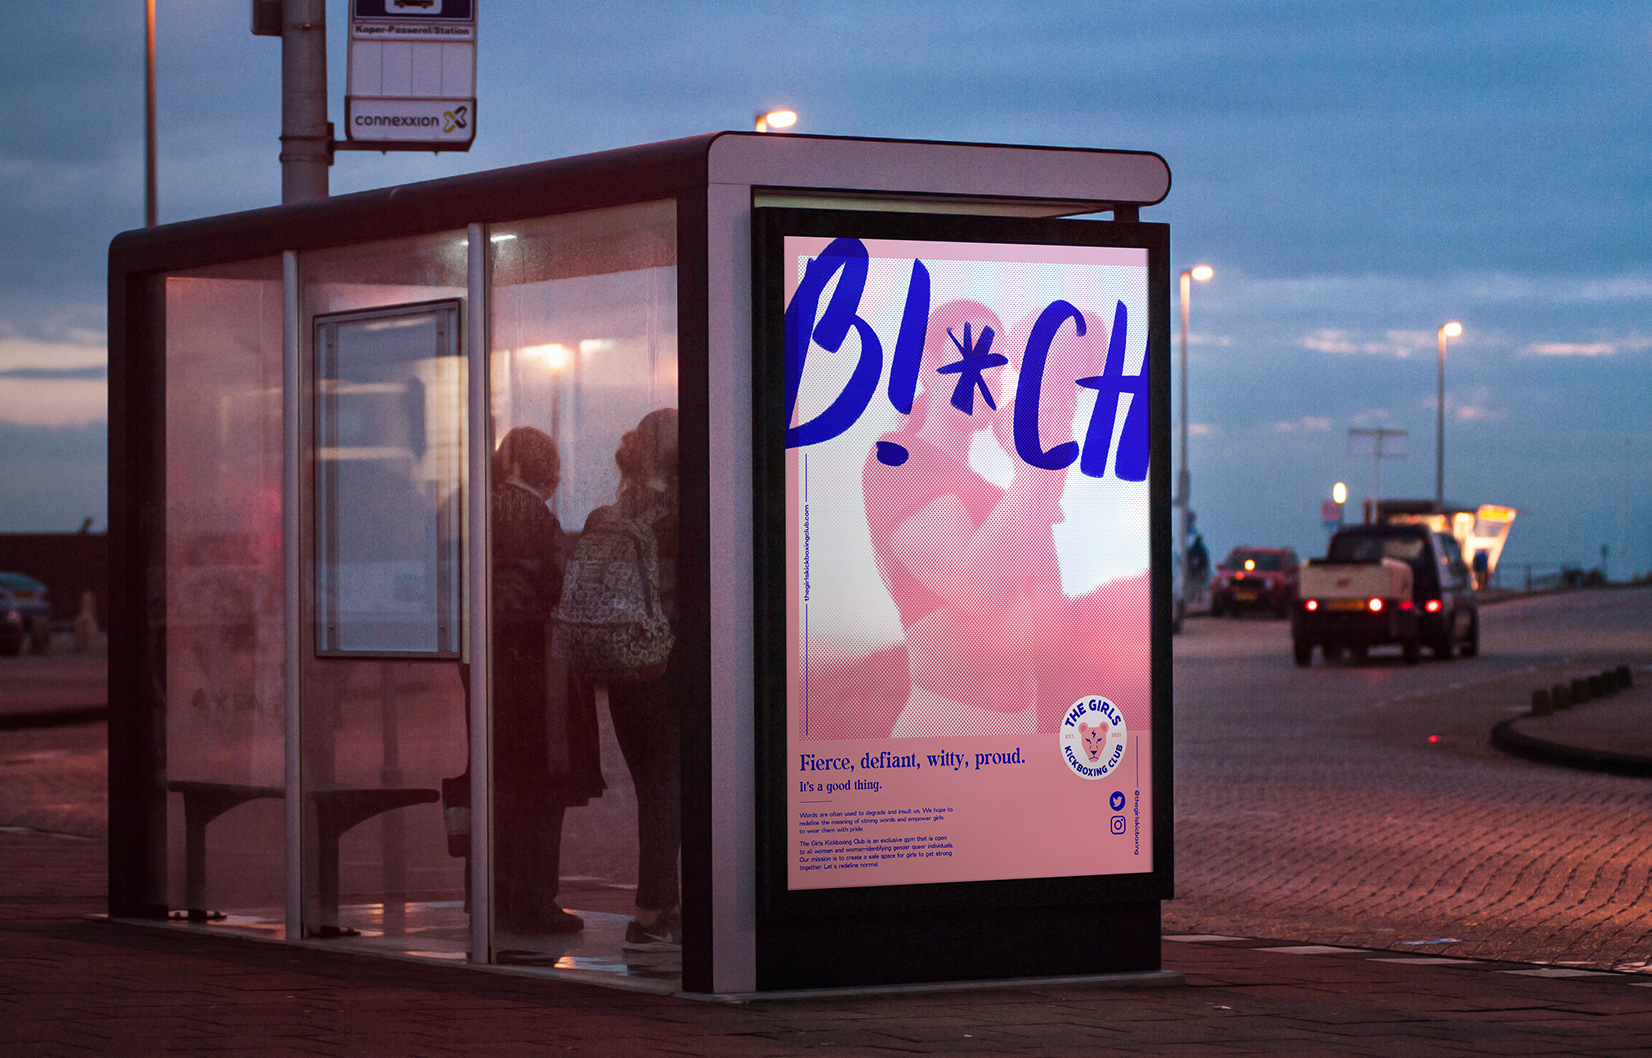 A pink empowering girls kickboxing poster at a bus stop.